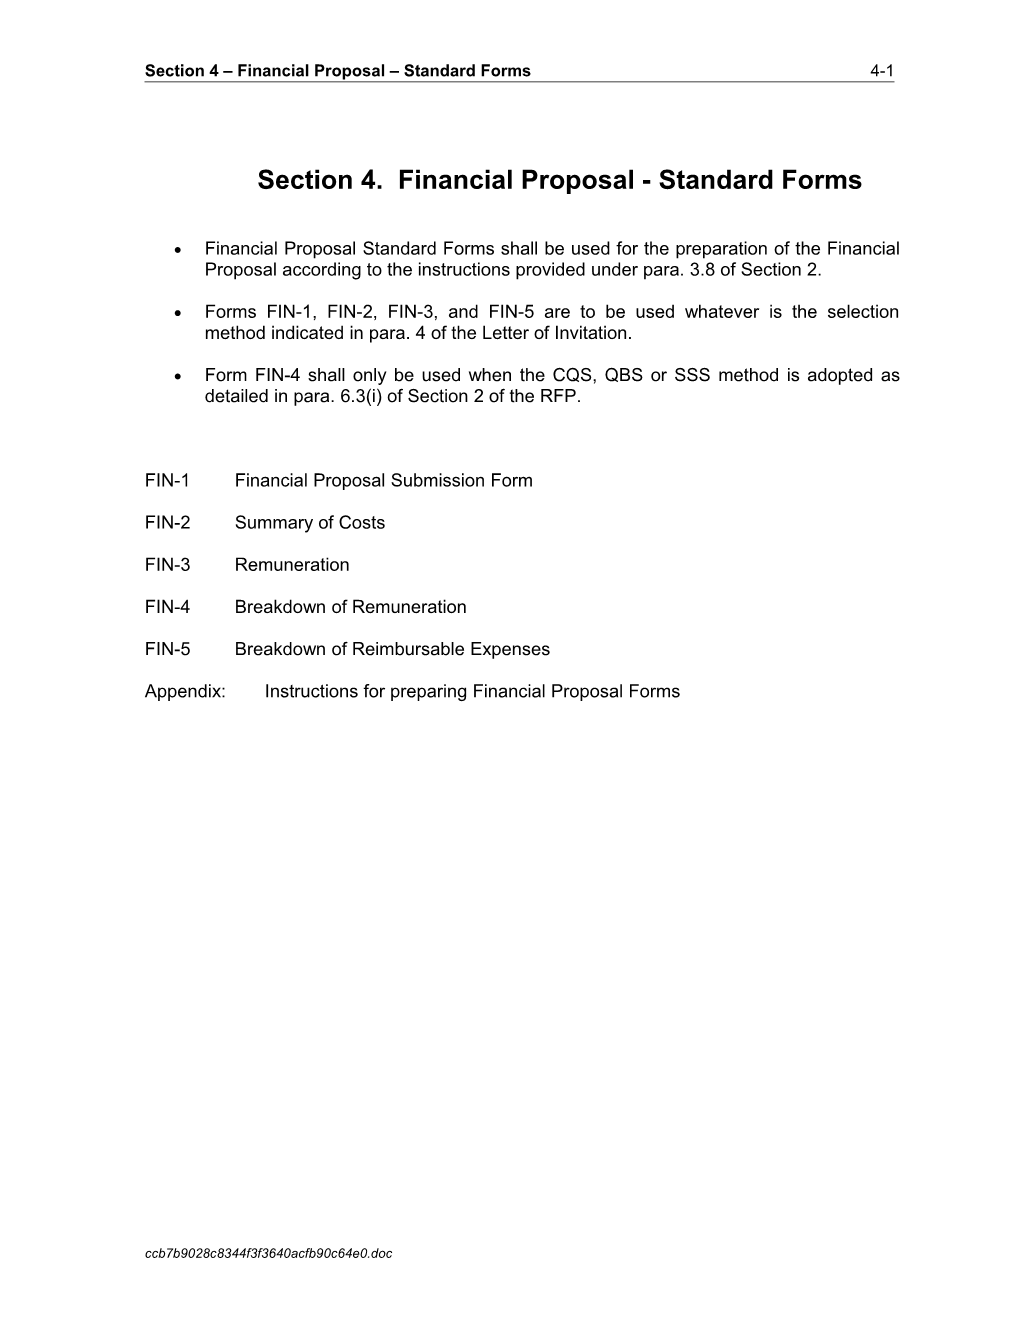 Section 4. Financial Proposal - Standard Forms